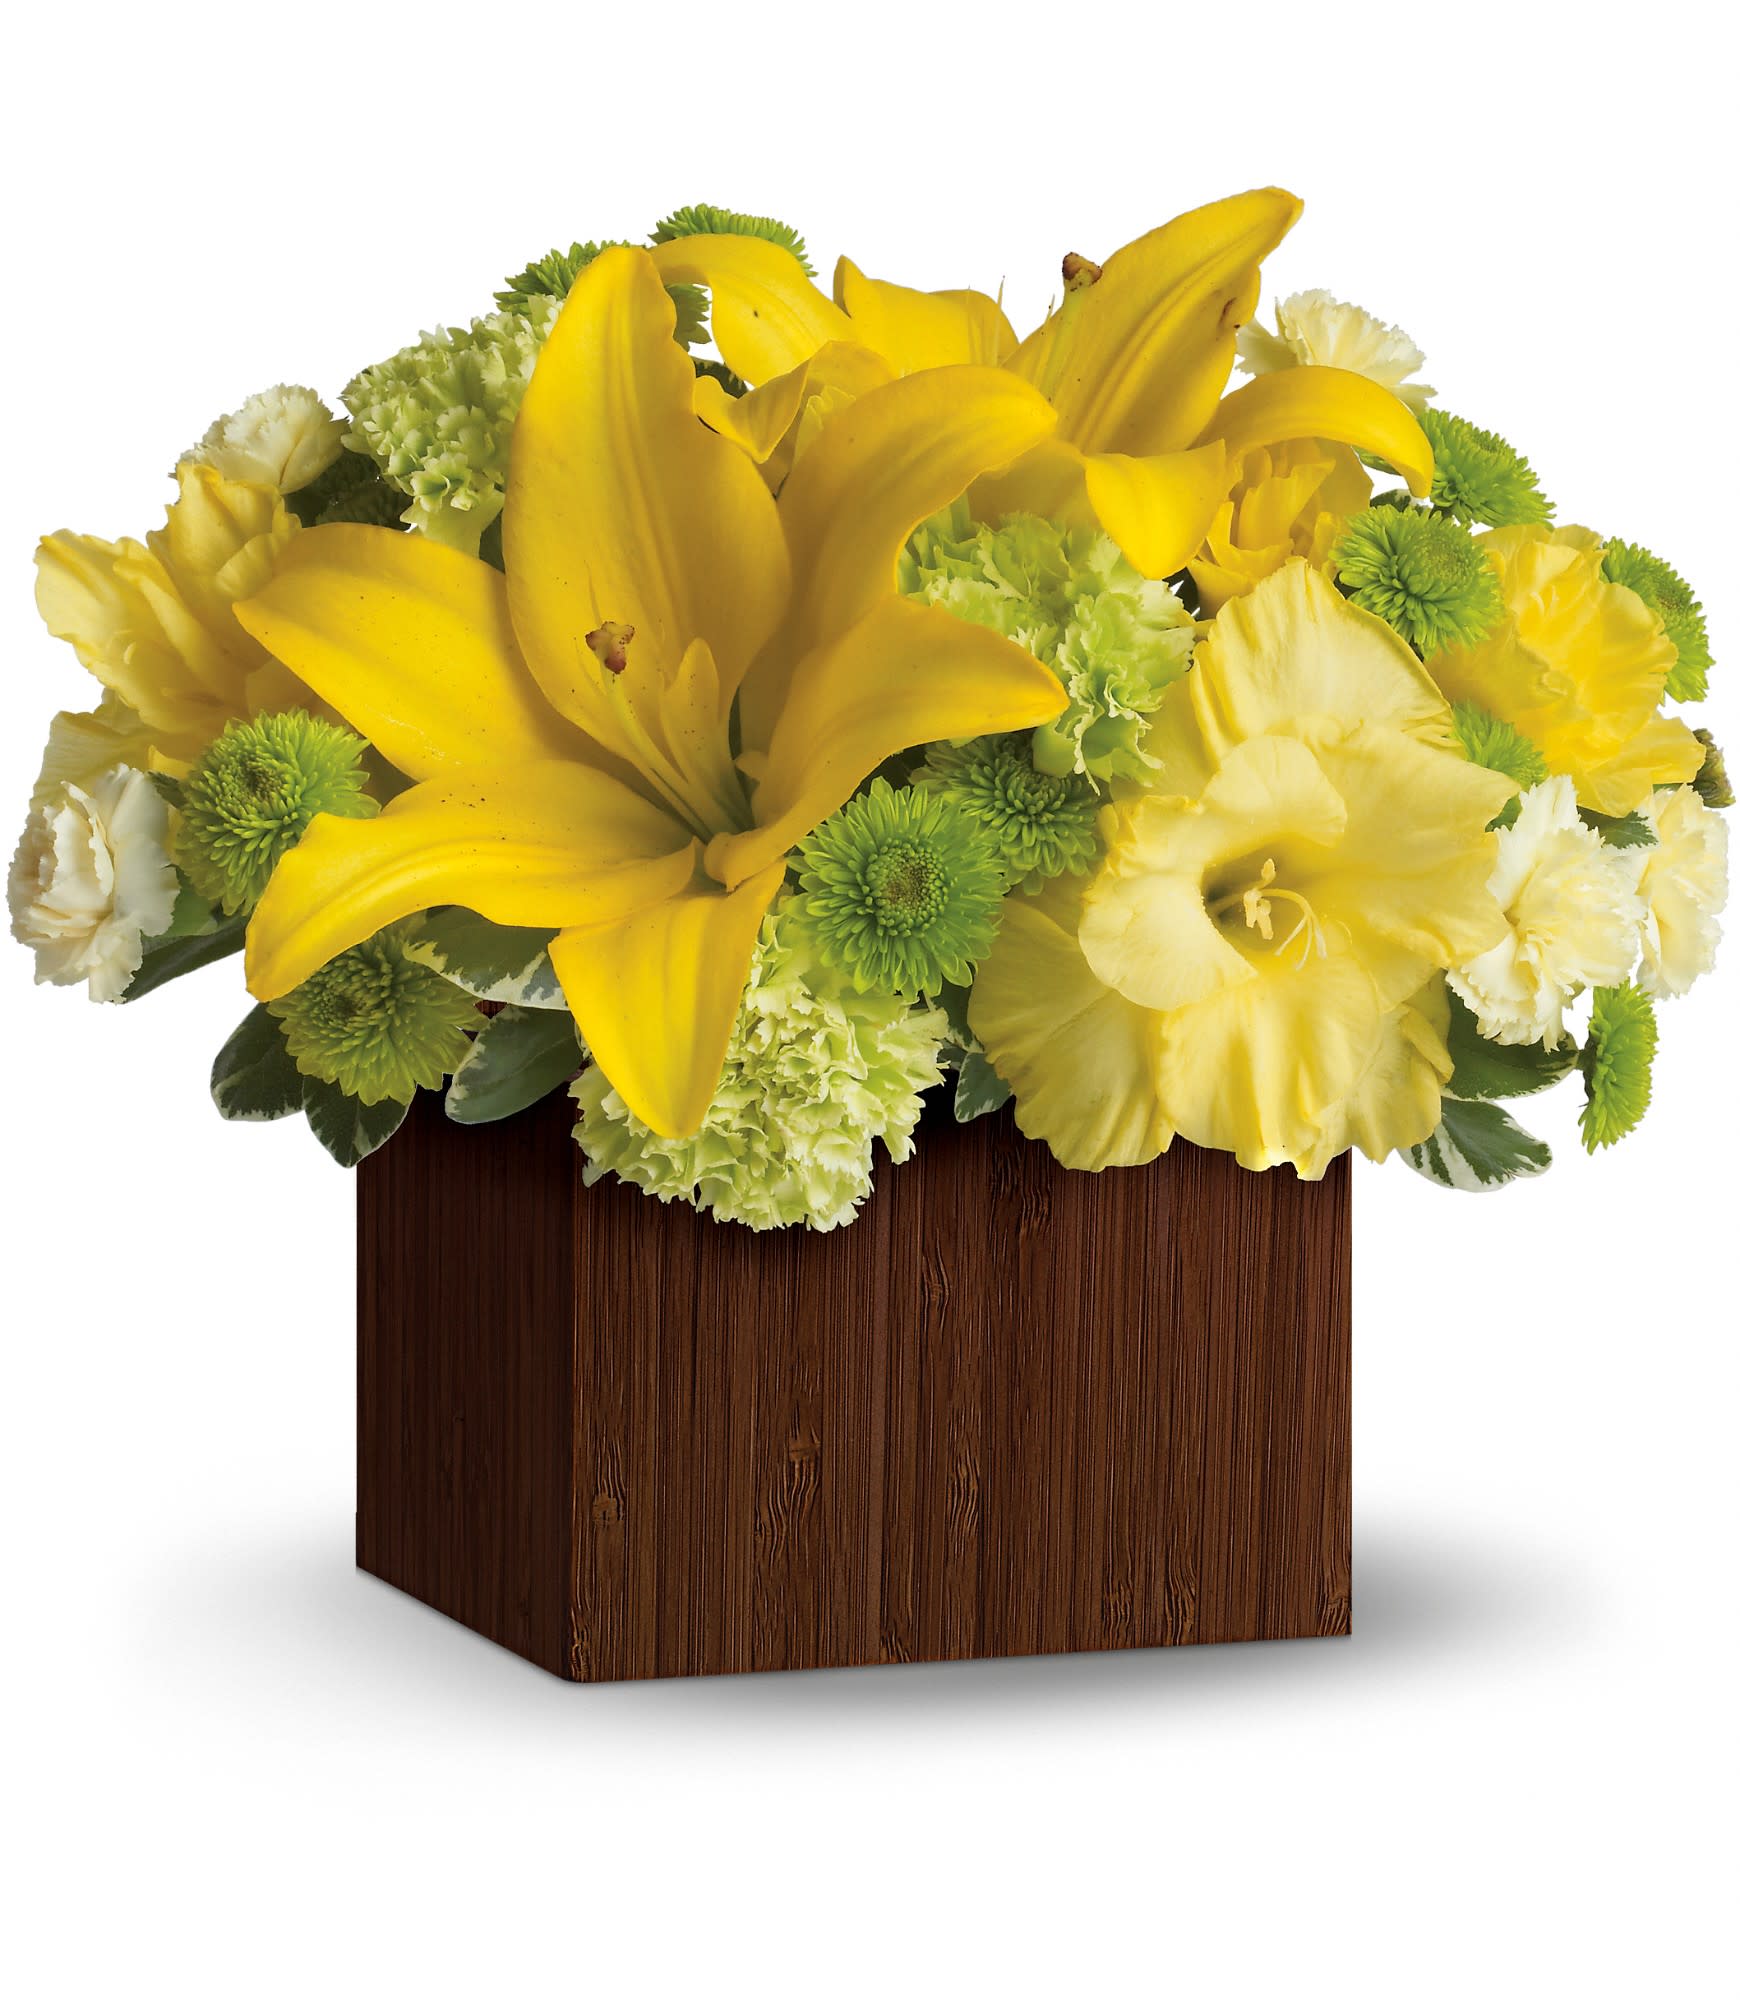 Teleflora's Smiles for Miles - Shower them with sunshine! An abundance of yellow and green blooms bursts from the stylish bamboo box, bringing miles of smiles along with it. What a joyful pick for him and her, any day of the year! 